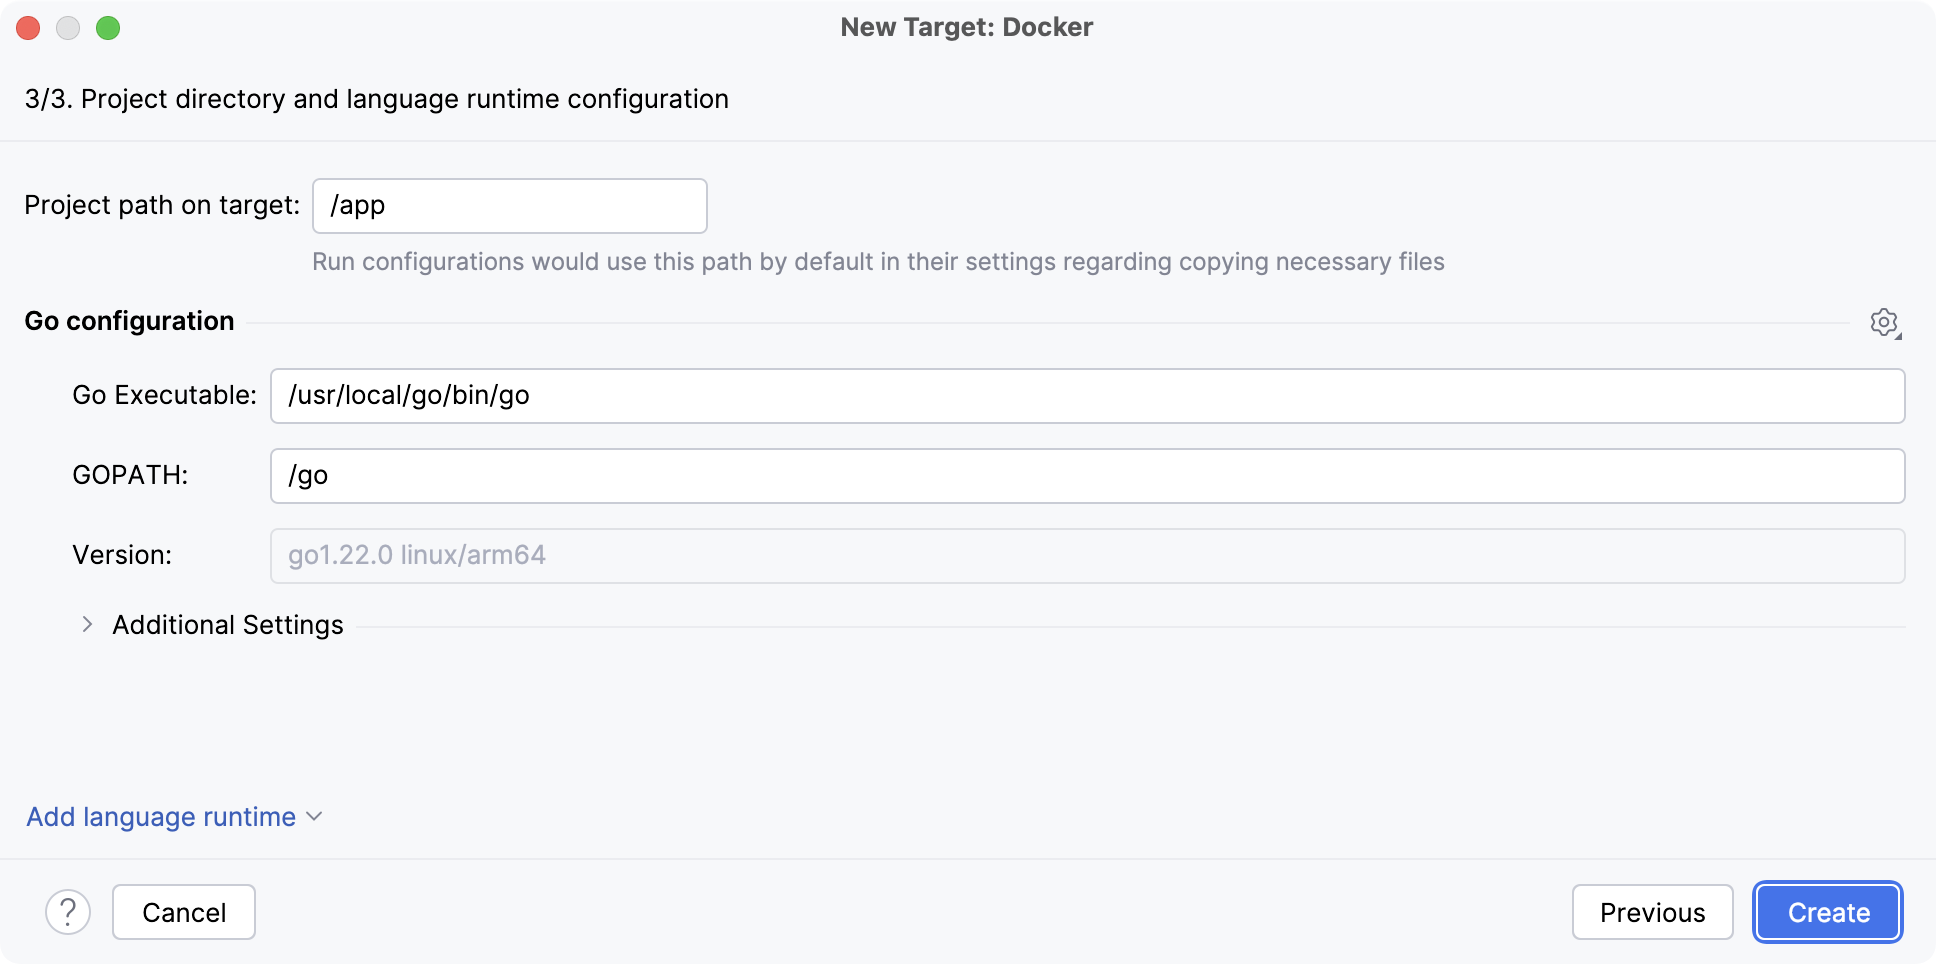 The final step of the Docker target